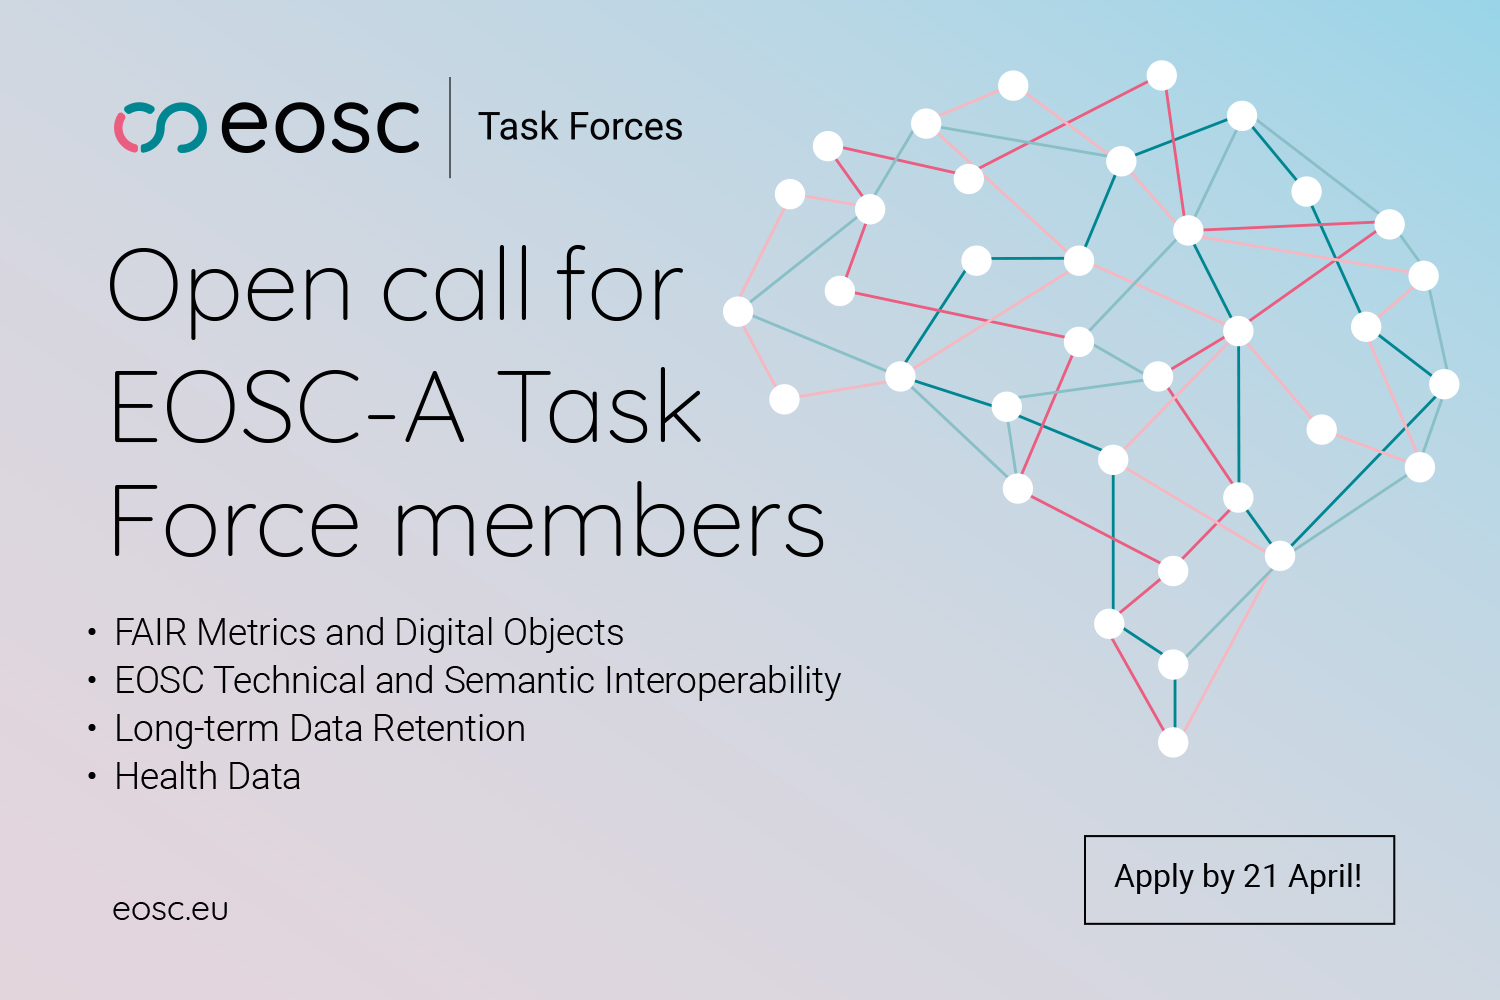 Open Call for EOSC Association Task Force Members